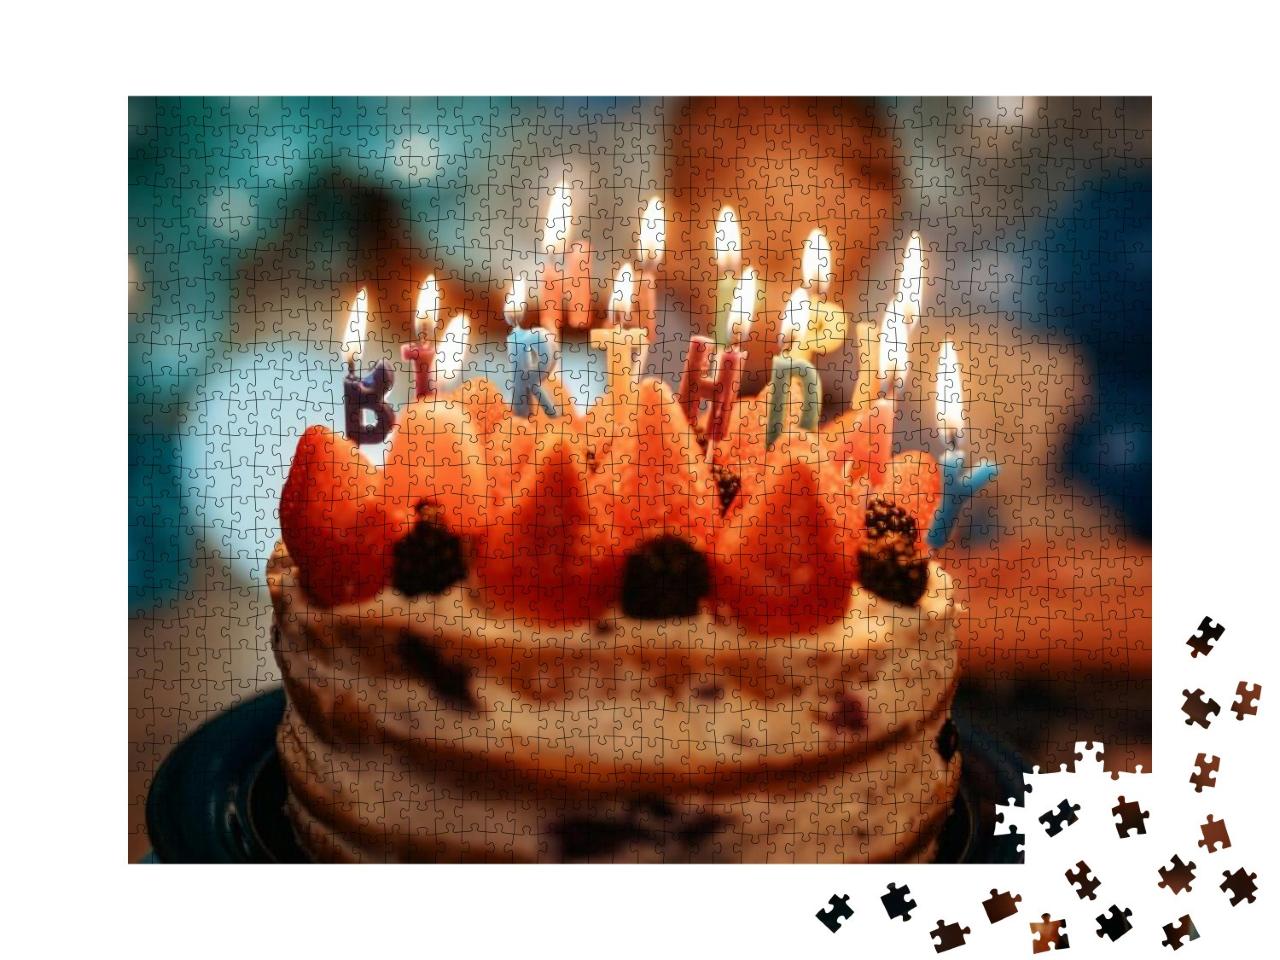 Birthday Cake with Candles Against Blue Balloons... Jigsaw Puzzle with 1000 pieces